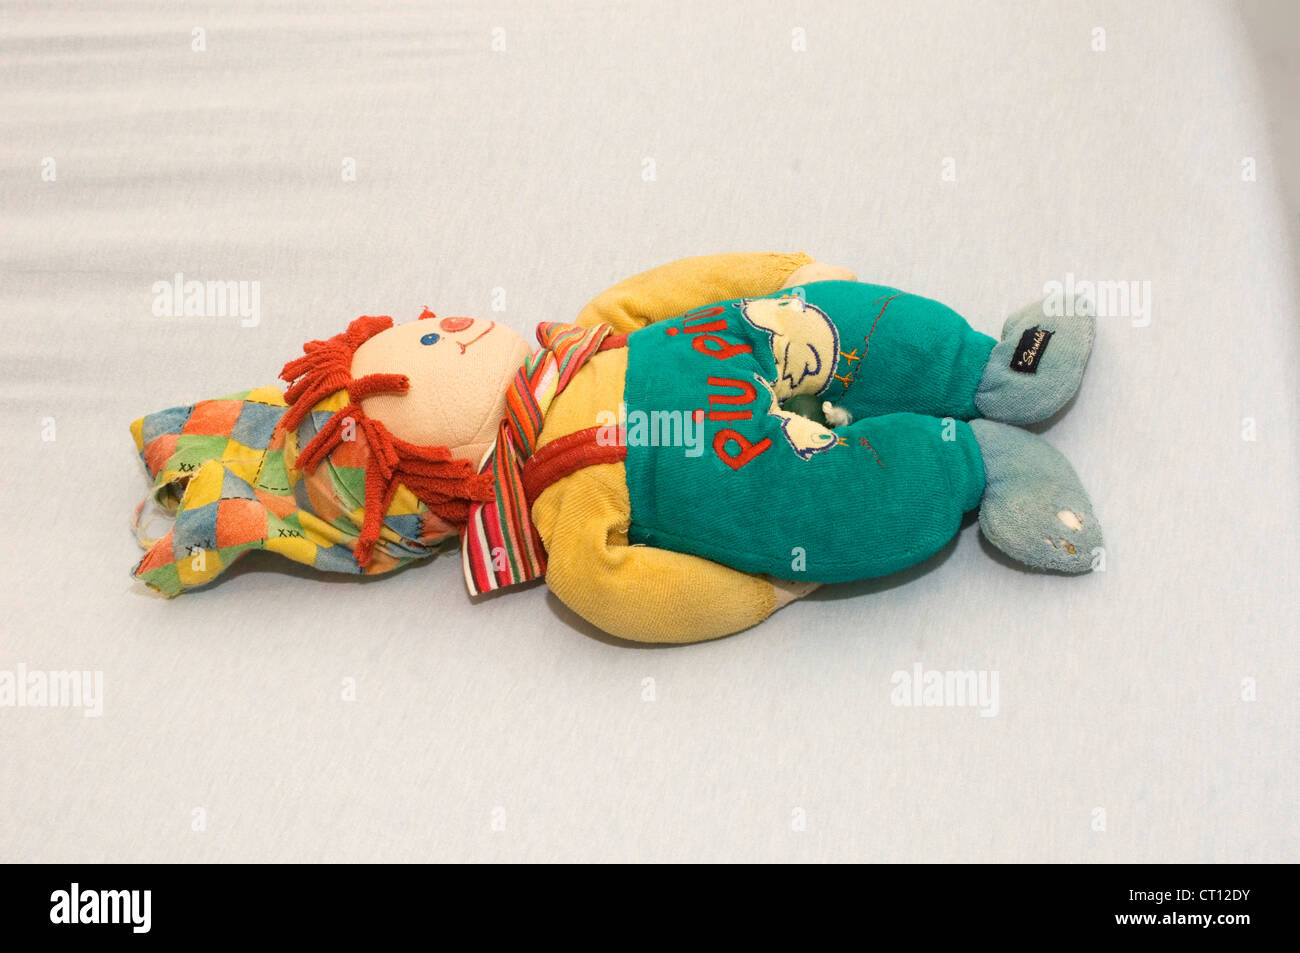 A child's cuddly toy left behind on a hospital bed while its own was undergoing a medical procedure. Stock Photo